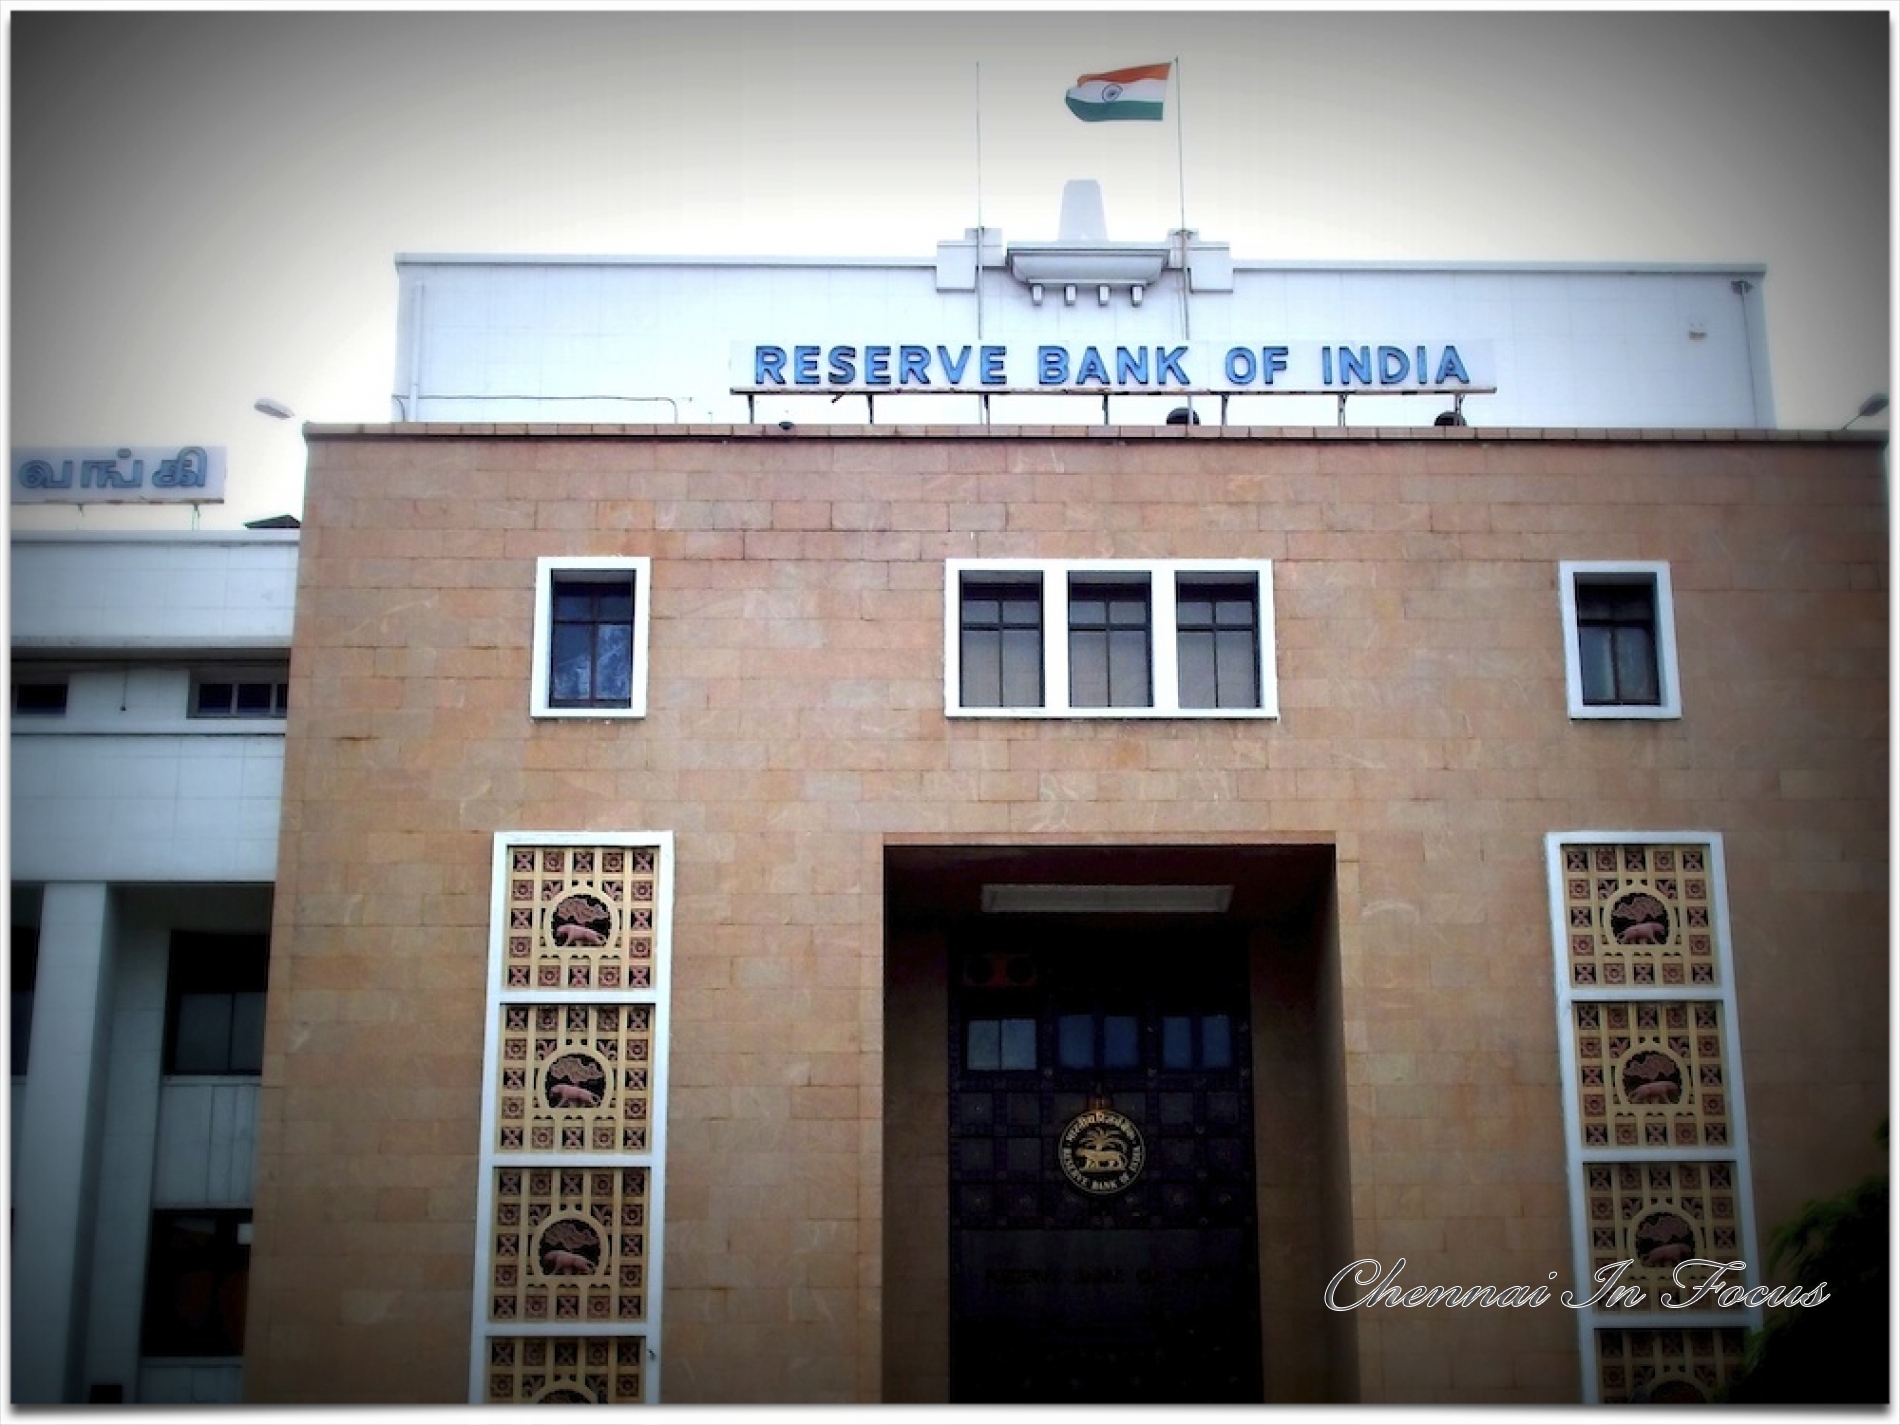 Reserve Bank of India - Chennai In Focus